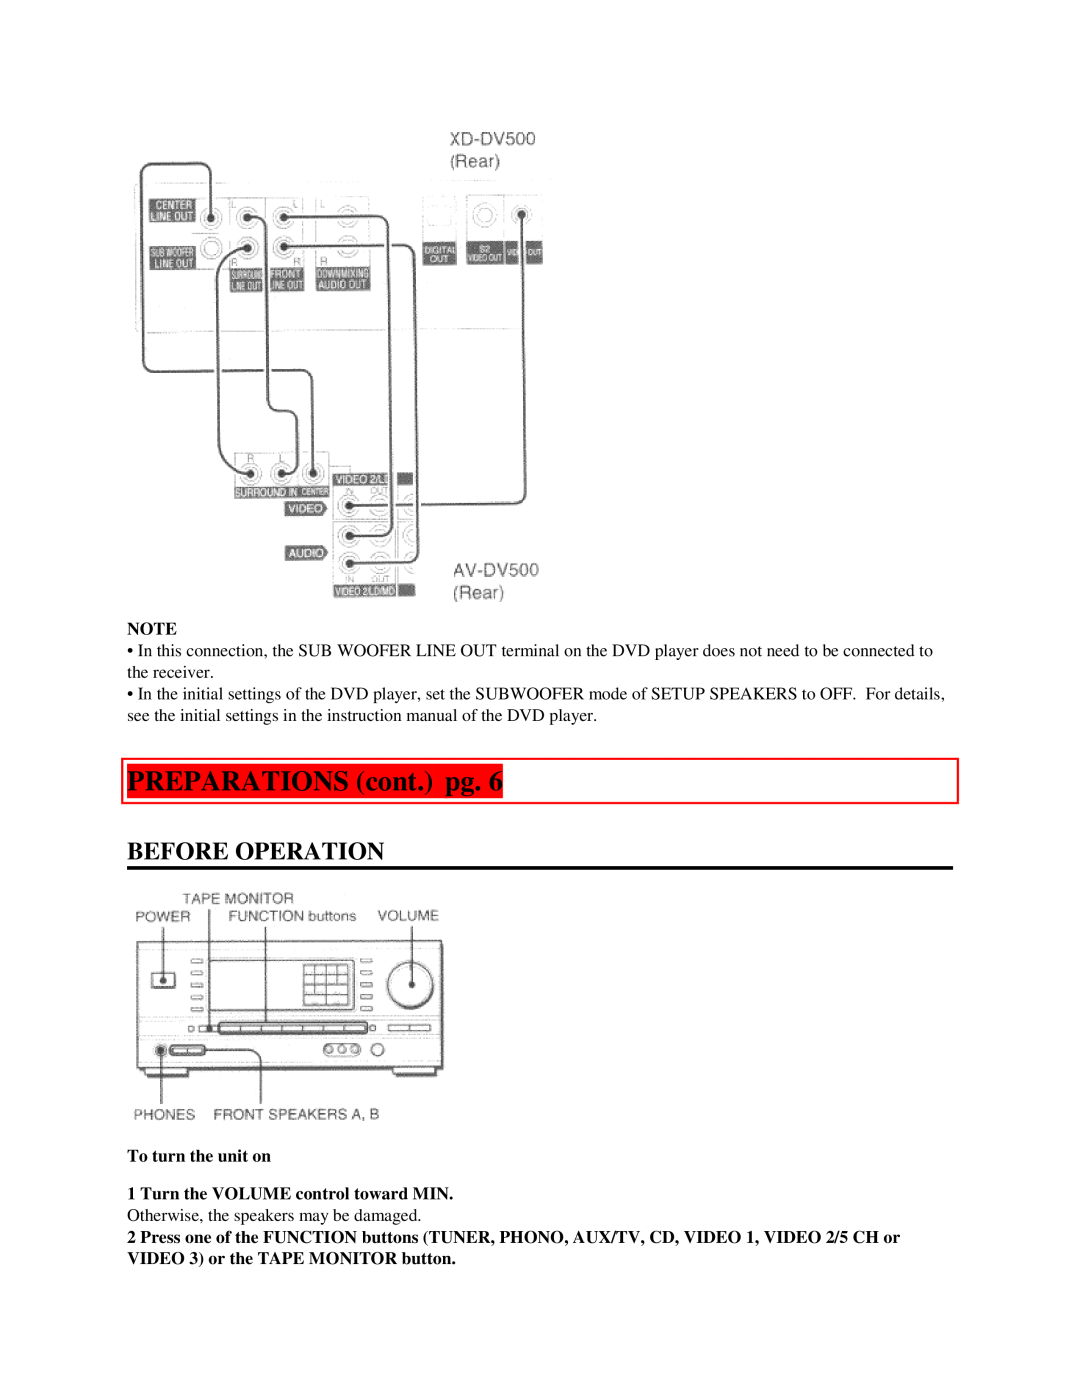 Aiwa AV-DV500 manual Before Operation, PREPARATIONS cont. pg, To turn the unit on, Turn the VOLUME control toward MIN 